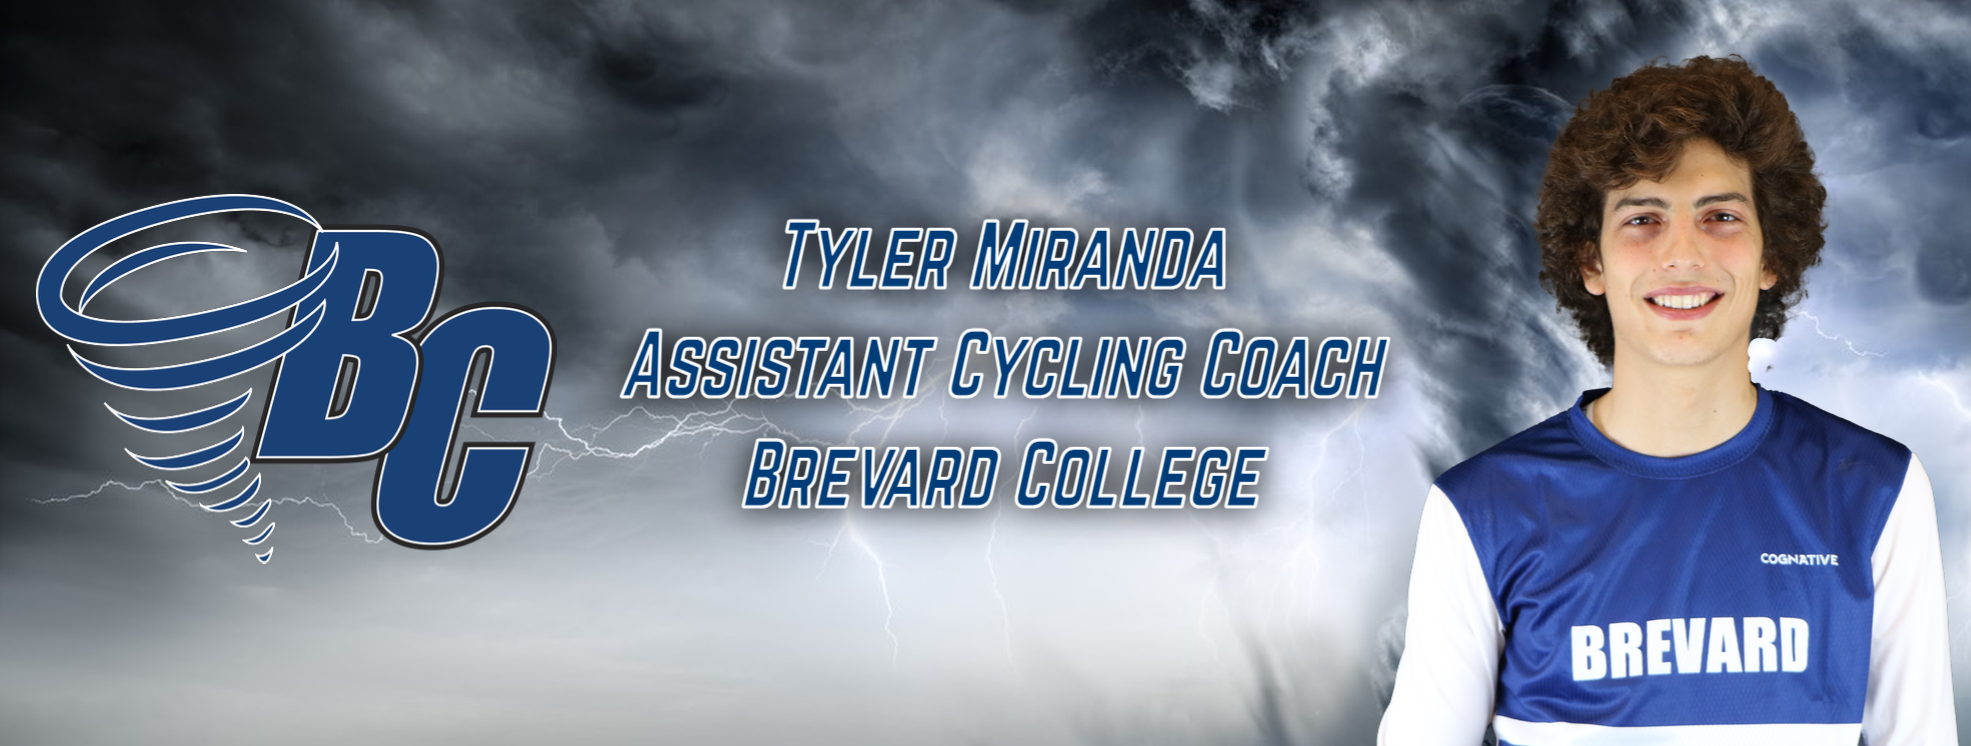 Tyler Miranda Named Brevard College Cycling Assistant Coach